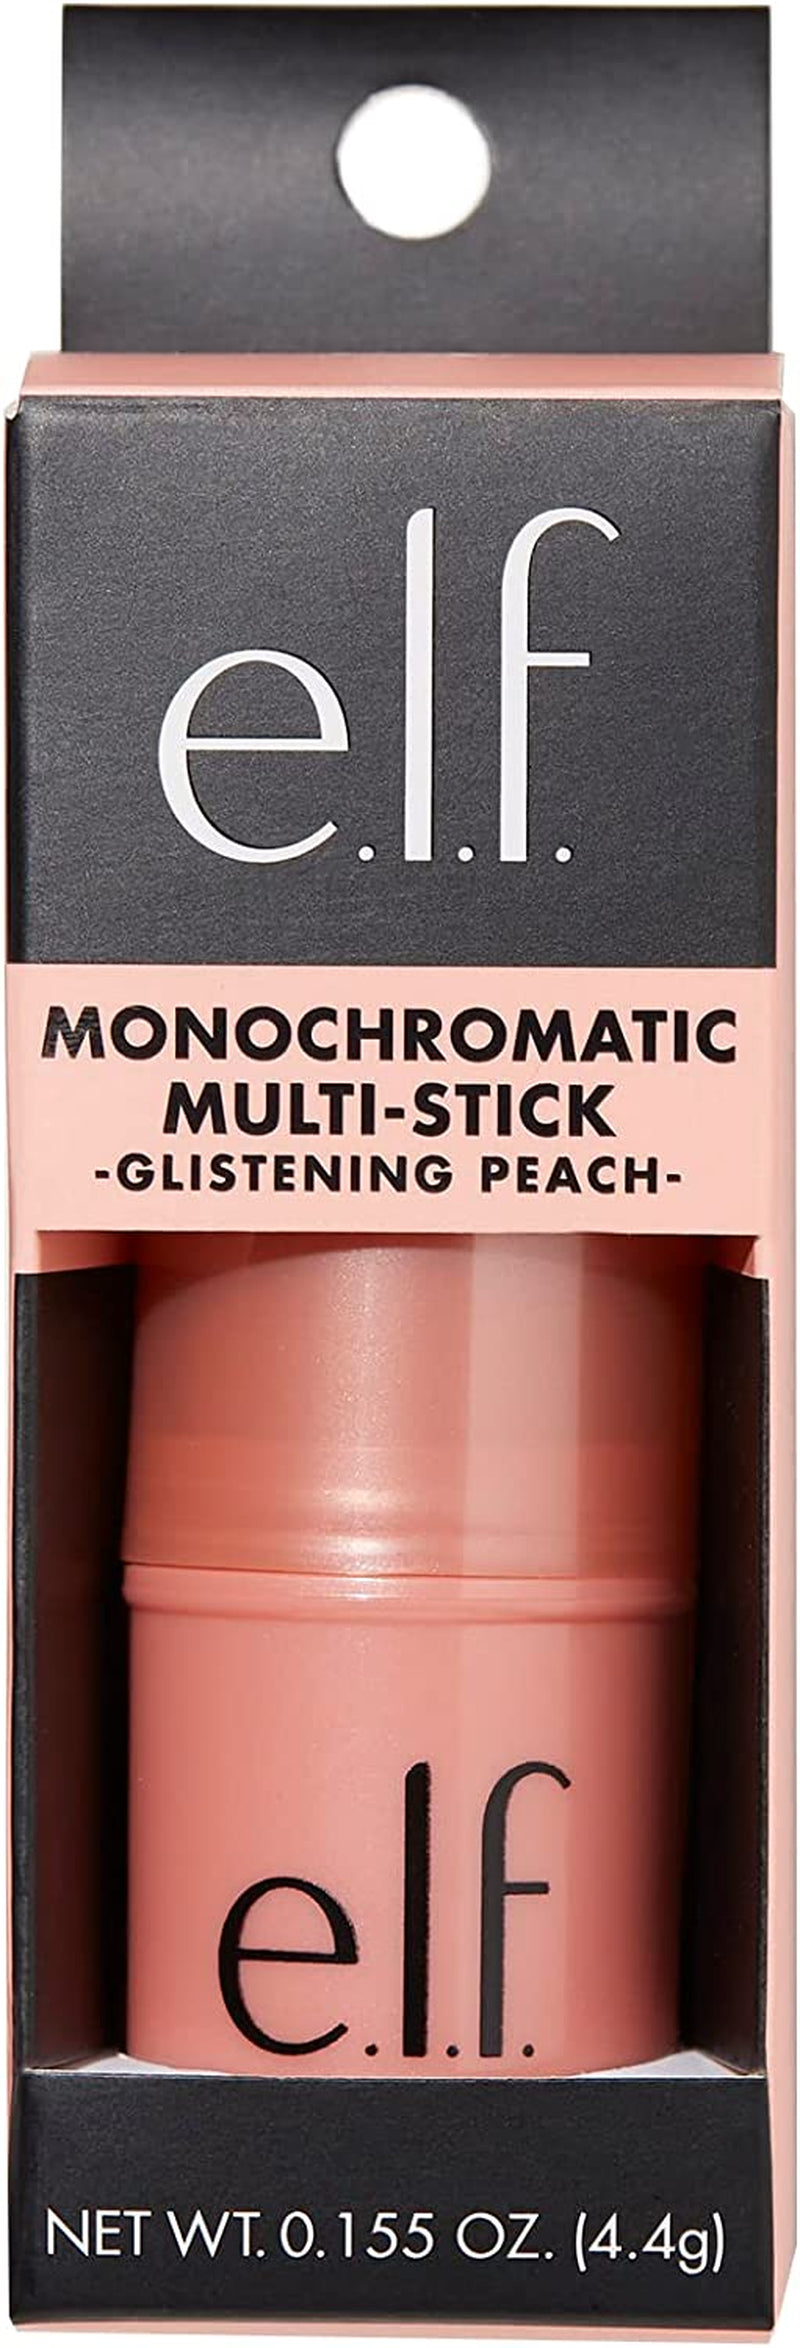 e.l.f. Monochromatic Multi-Stick Blush, Creamy, Lightweight, Versatile, Luxurious, Adds Shimmer, Easy to Use on the Go, Blends Effortlessly, Glistening Peach 4.4G